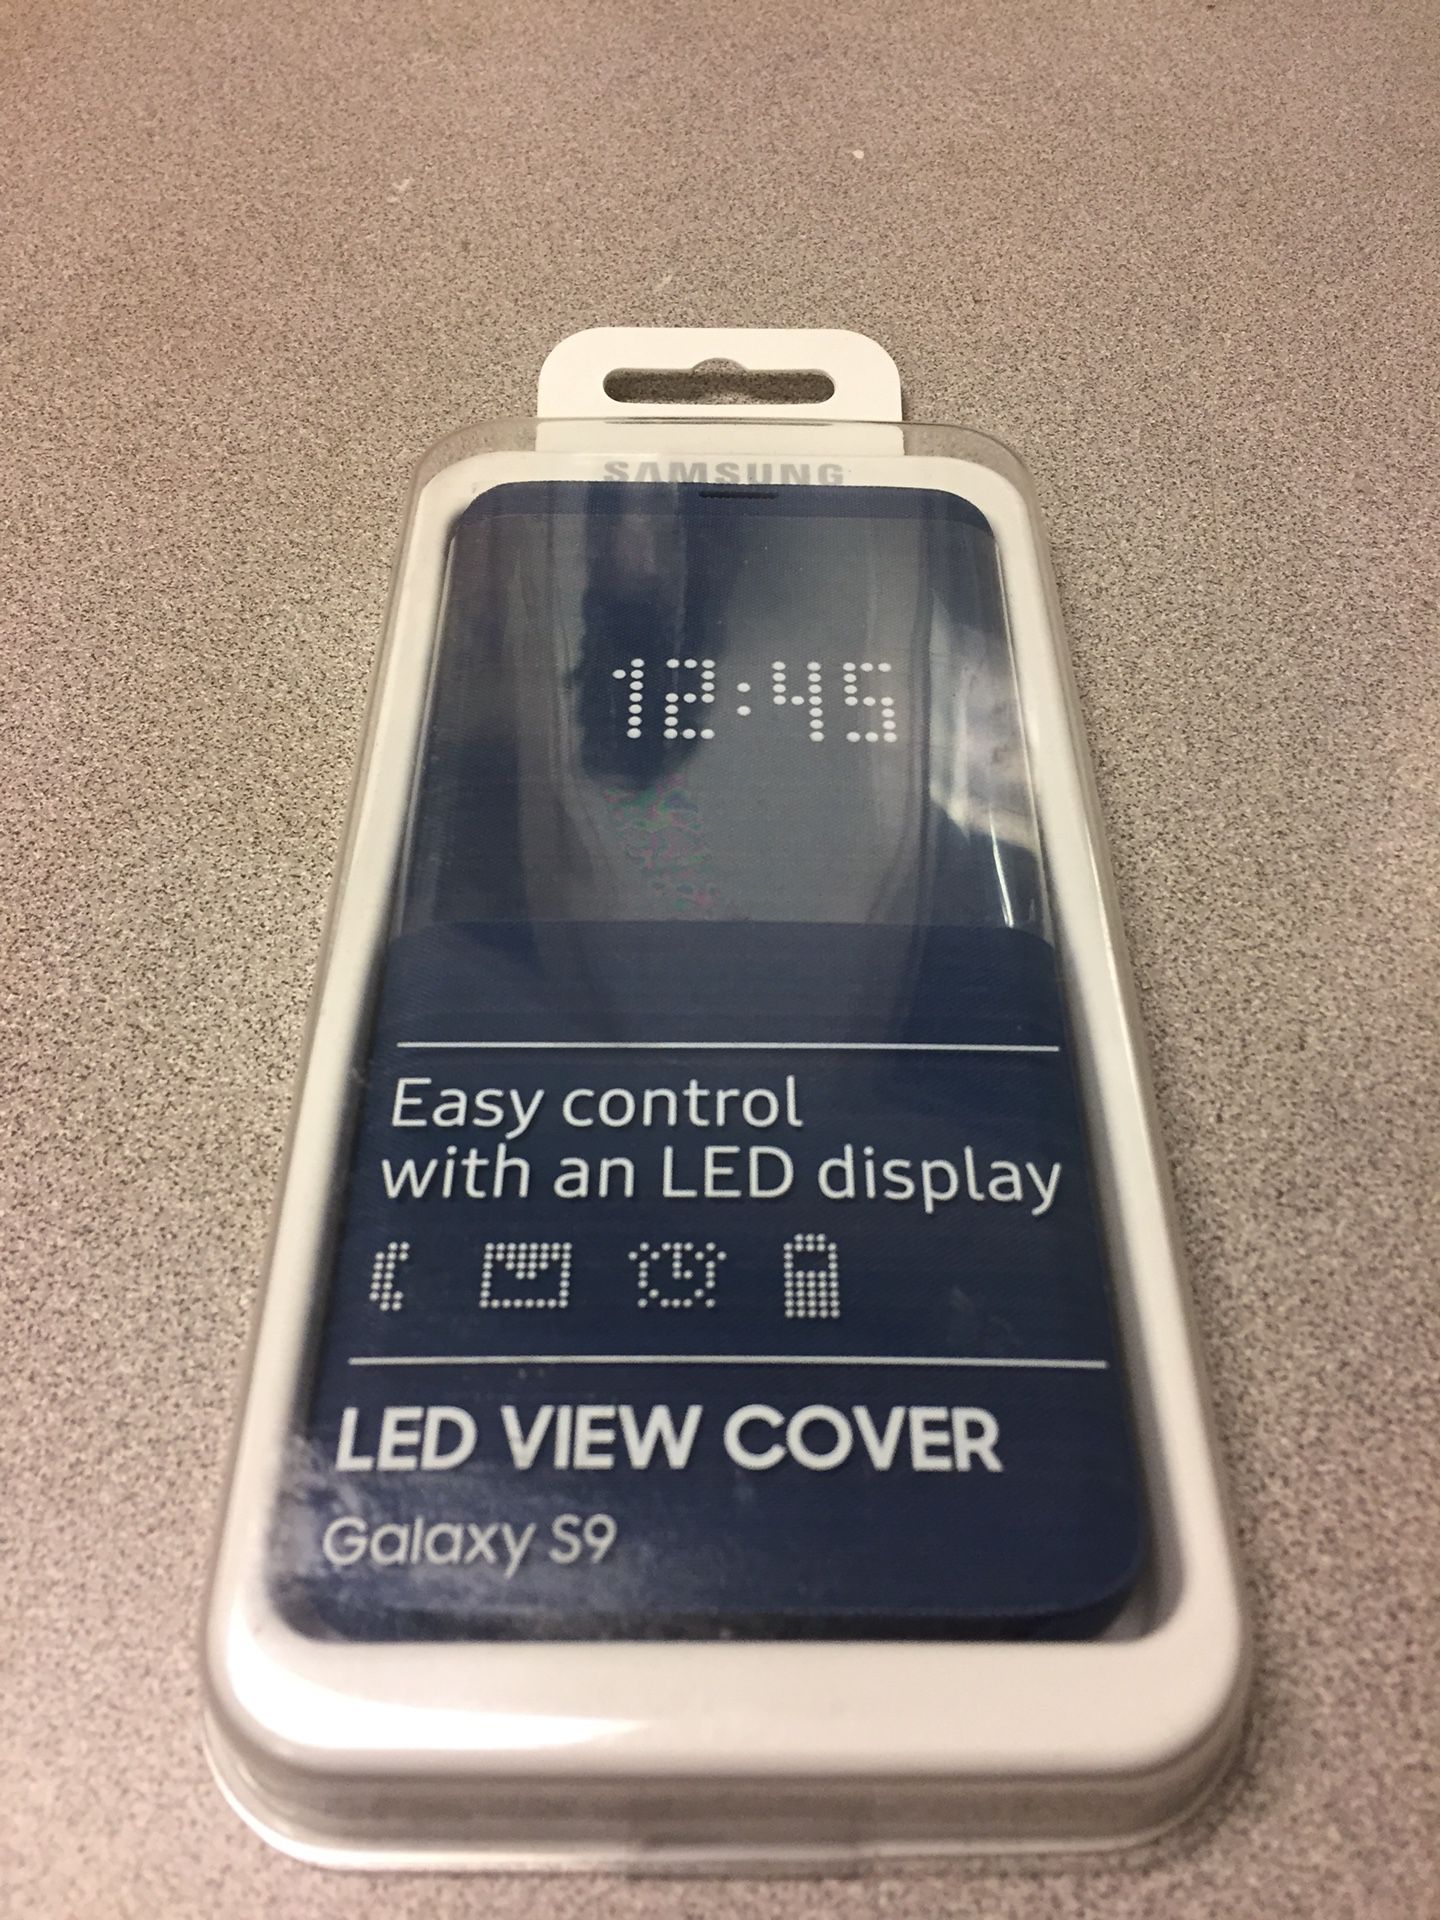 Galaxy S9 Led view cover for Sale in Virginia Beach, VA - OfferUp